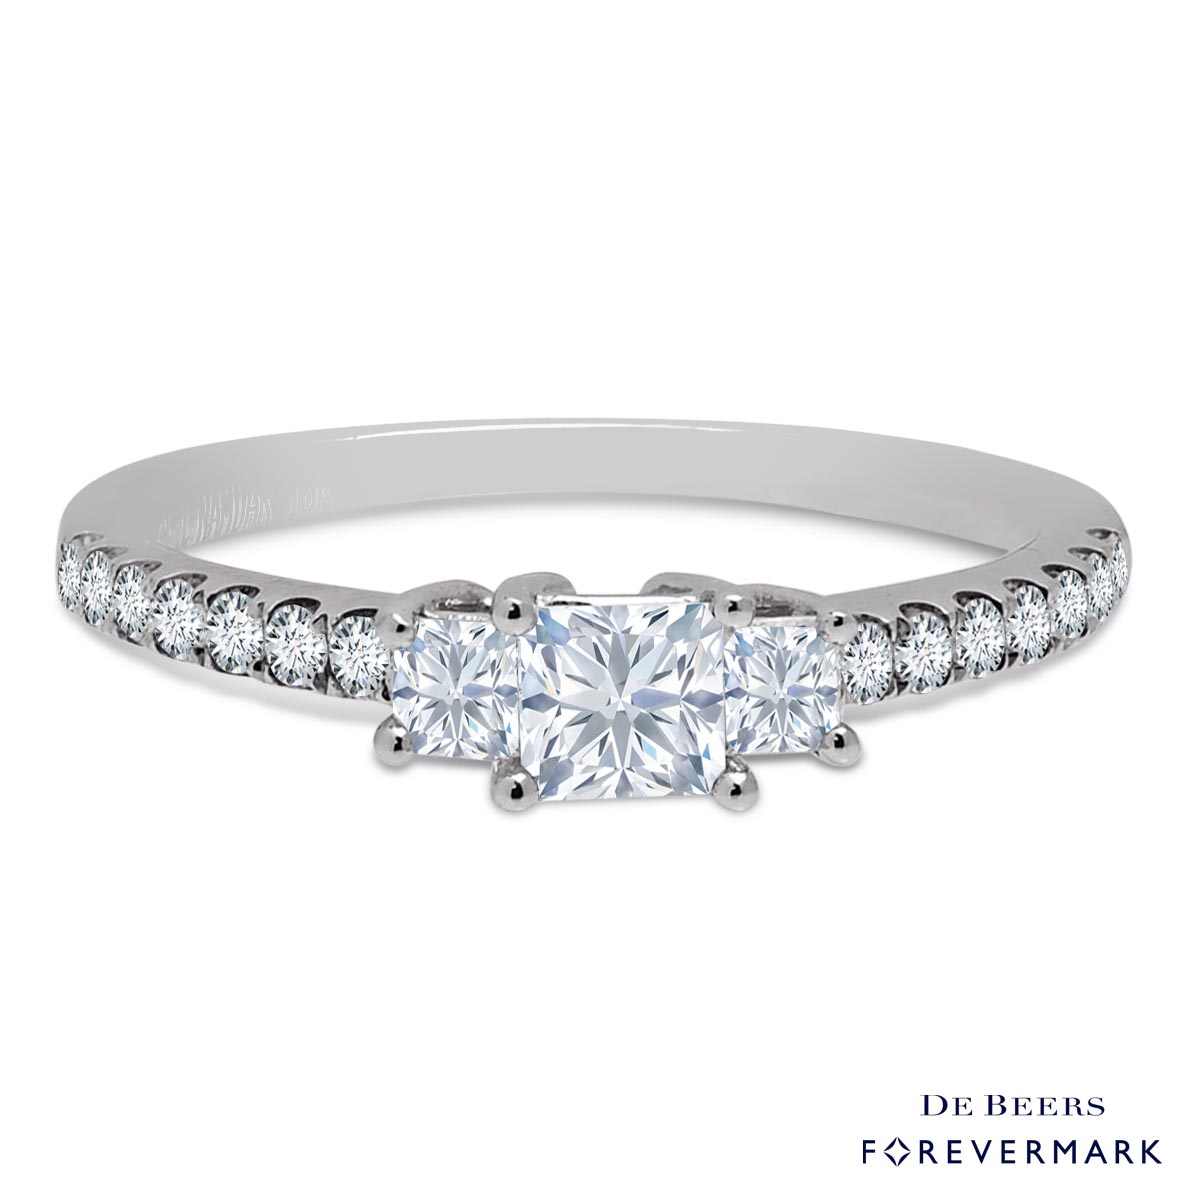 De Beers Forevermark Three Stone Diamond Halo Ring in 18kt White Gold